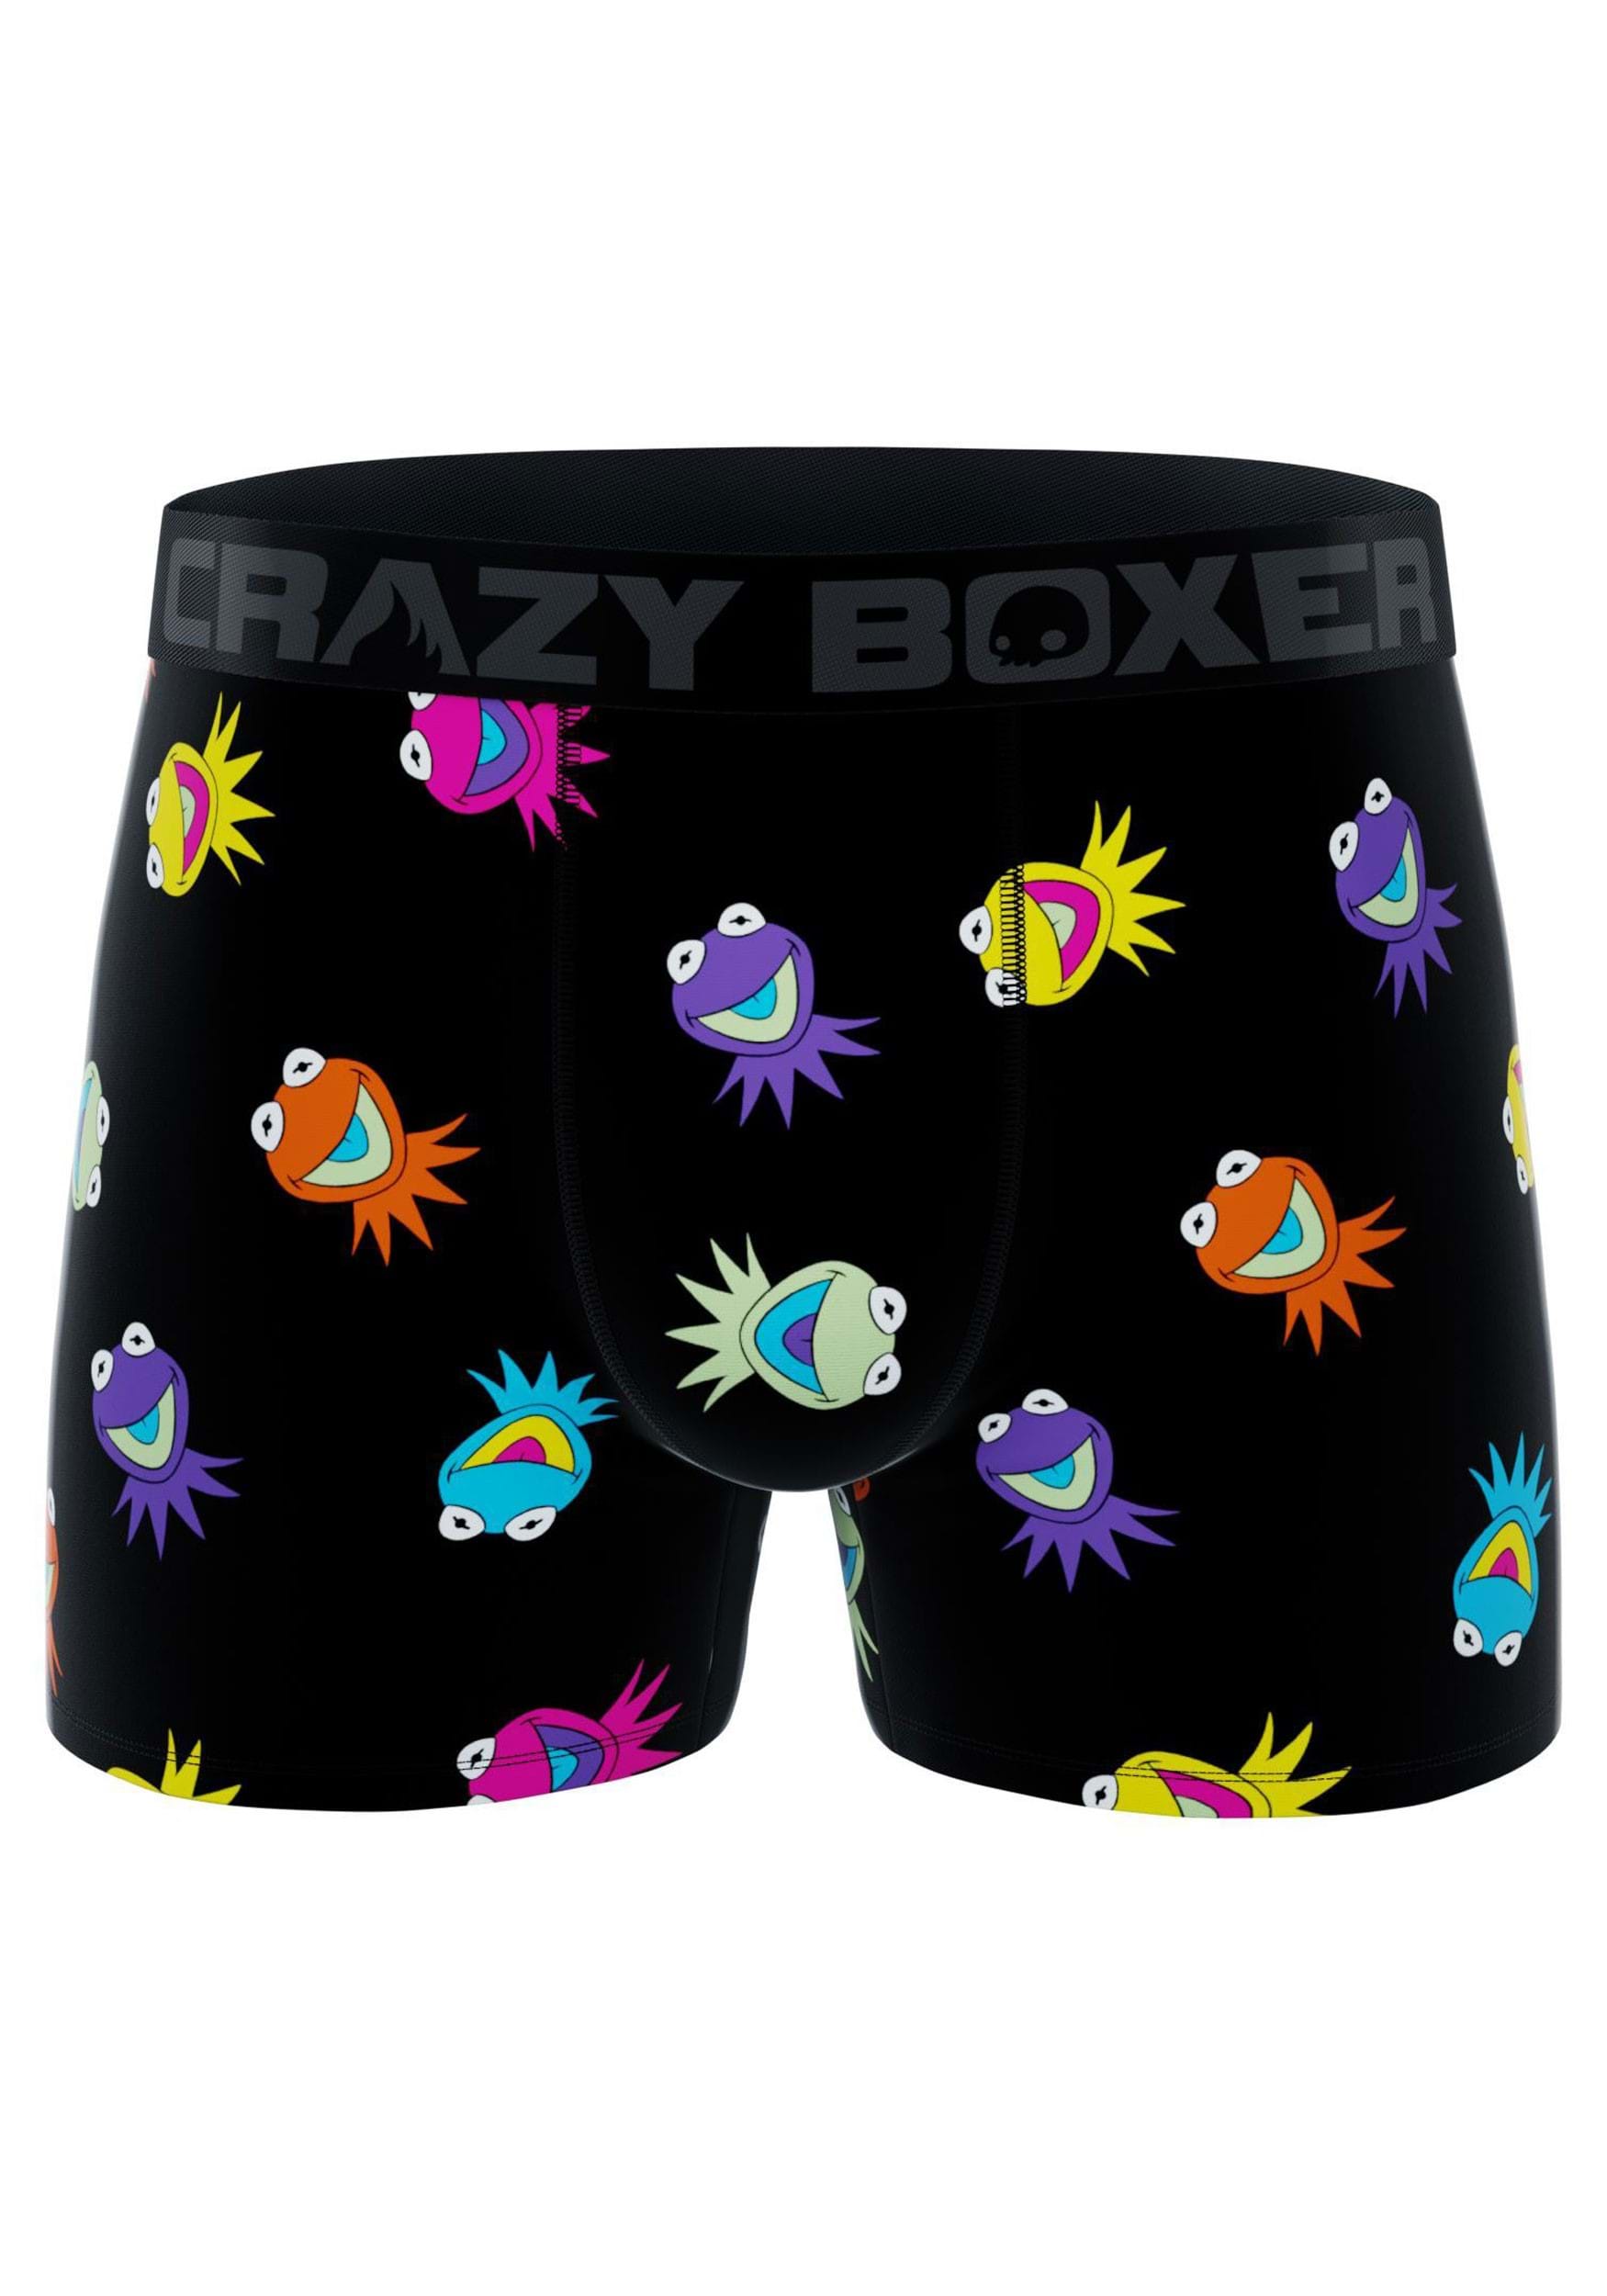 The Muppets Kermit the Frog Mens Boxer Briefs